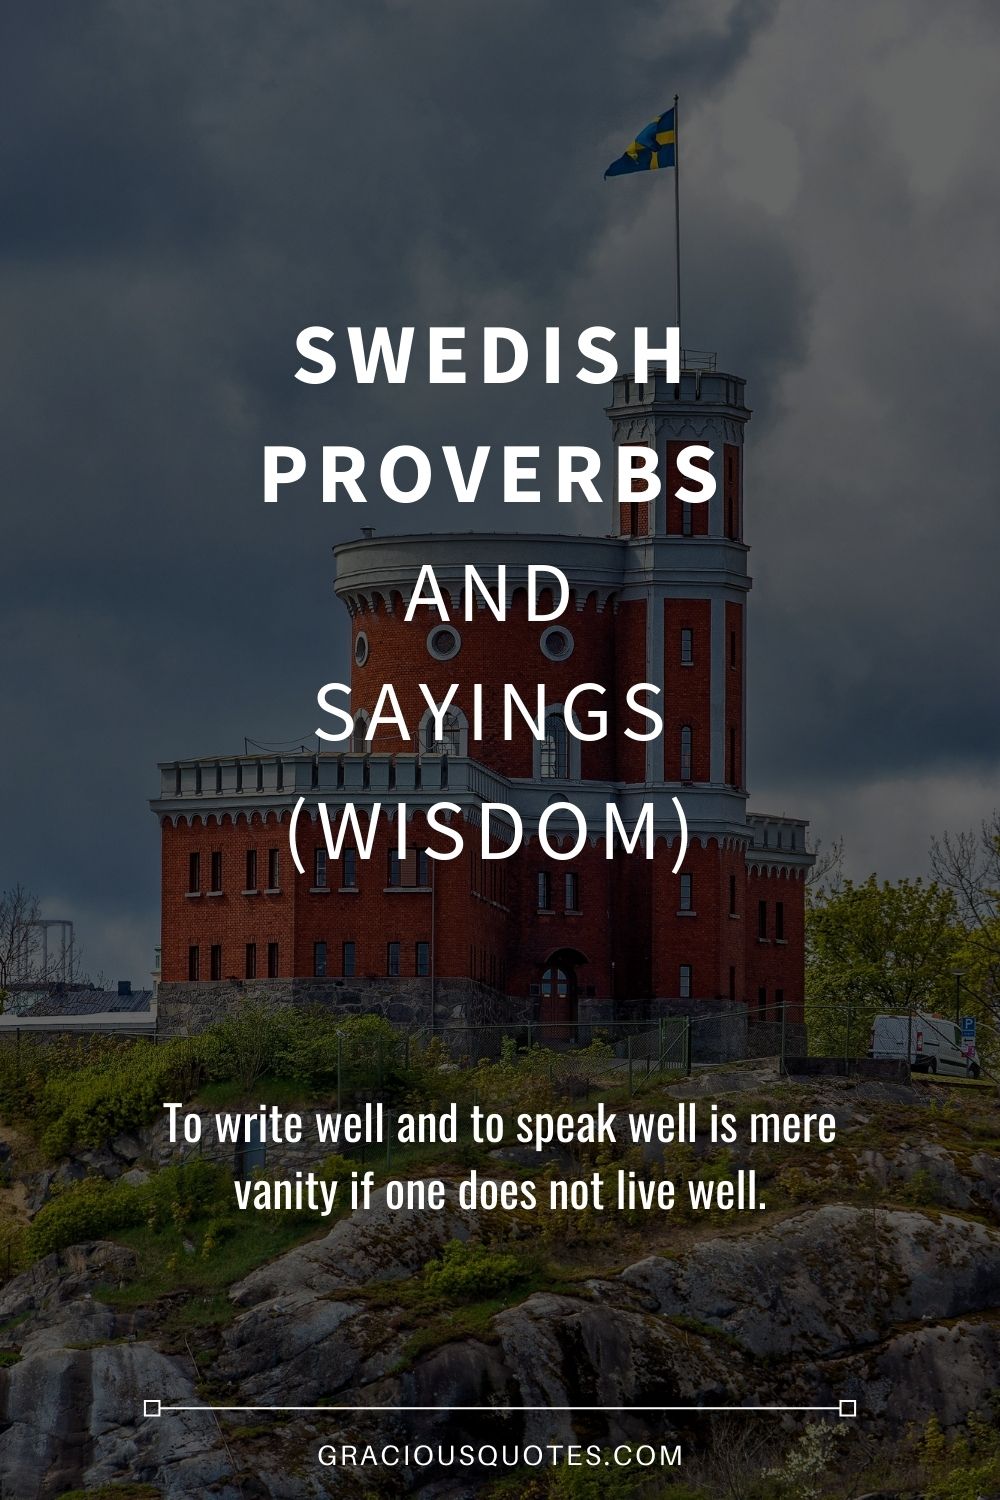 Swedish Proverbs and Sayings (WISDOM) - Gracious Quotes